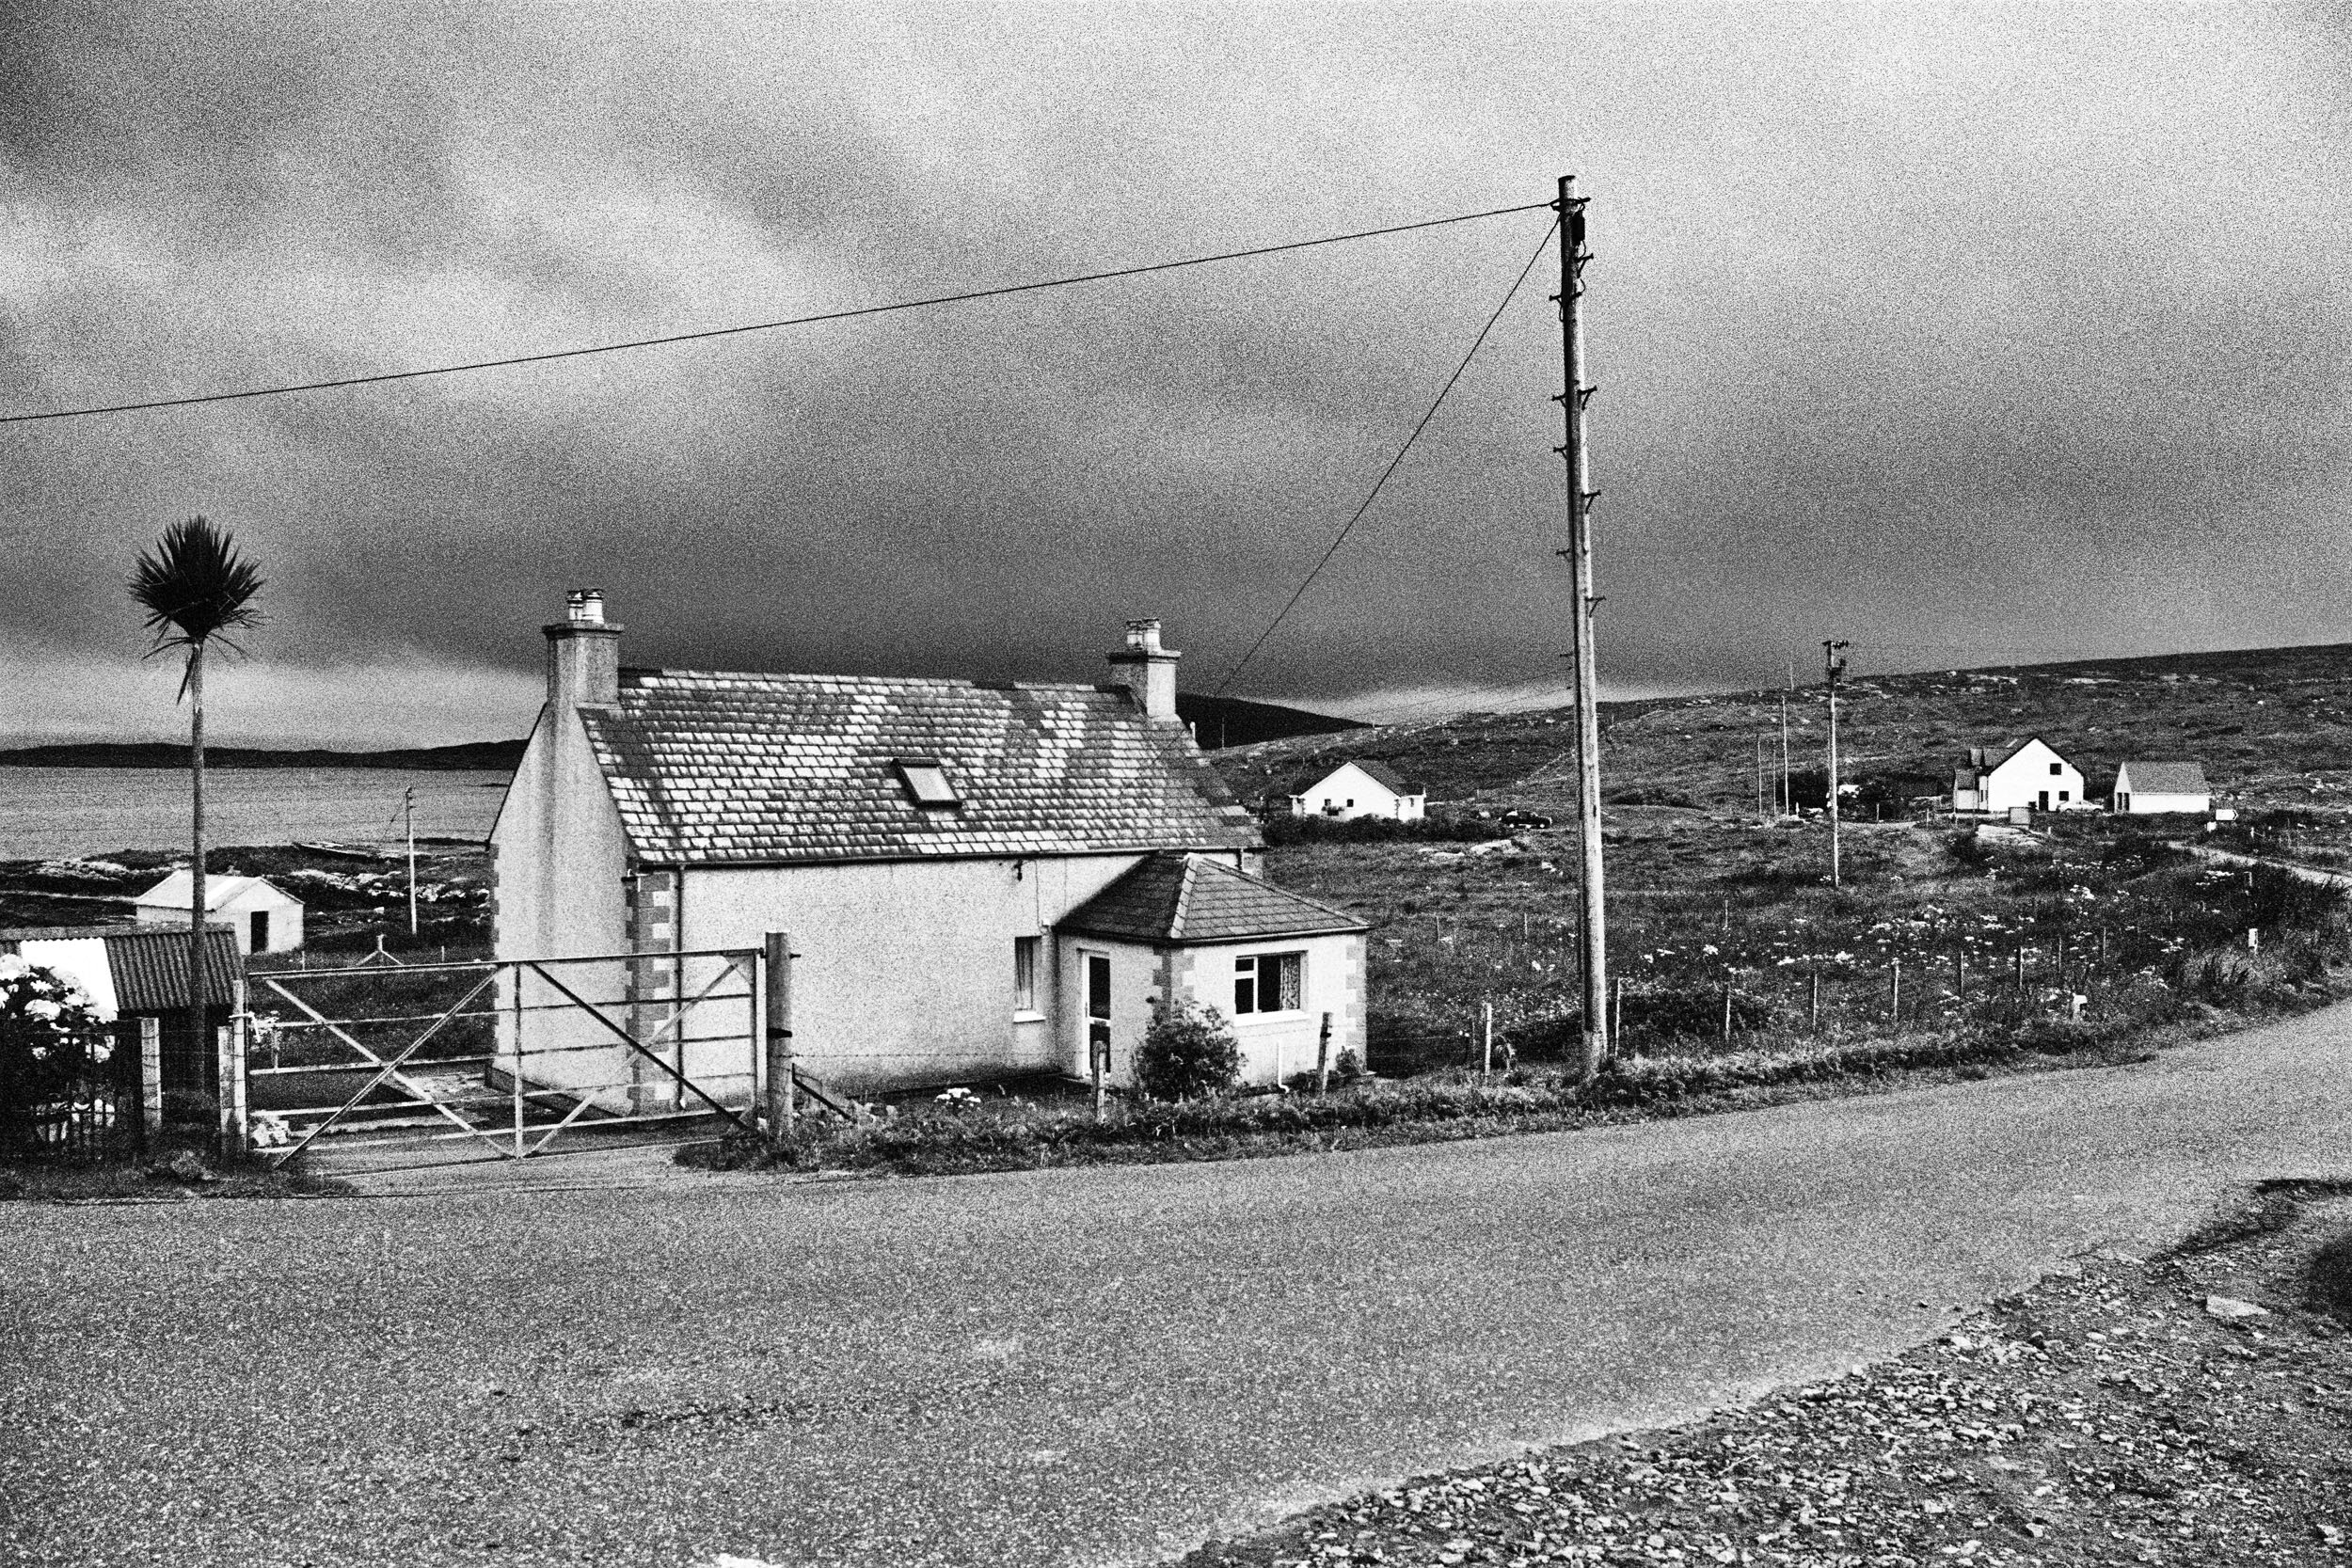  House with Palm Tree and Telegraph Pole, Isle of Berneray, 2018 